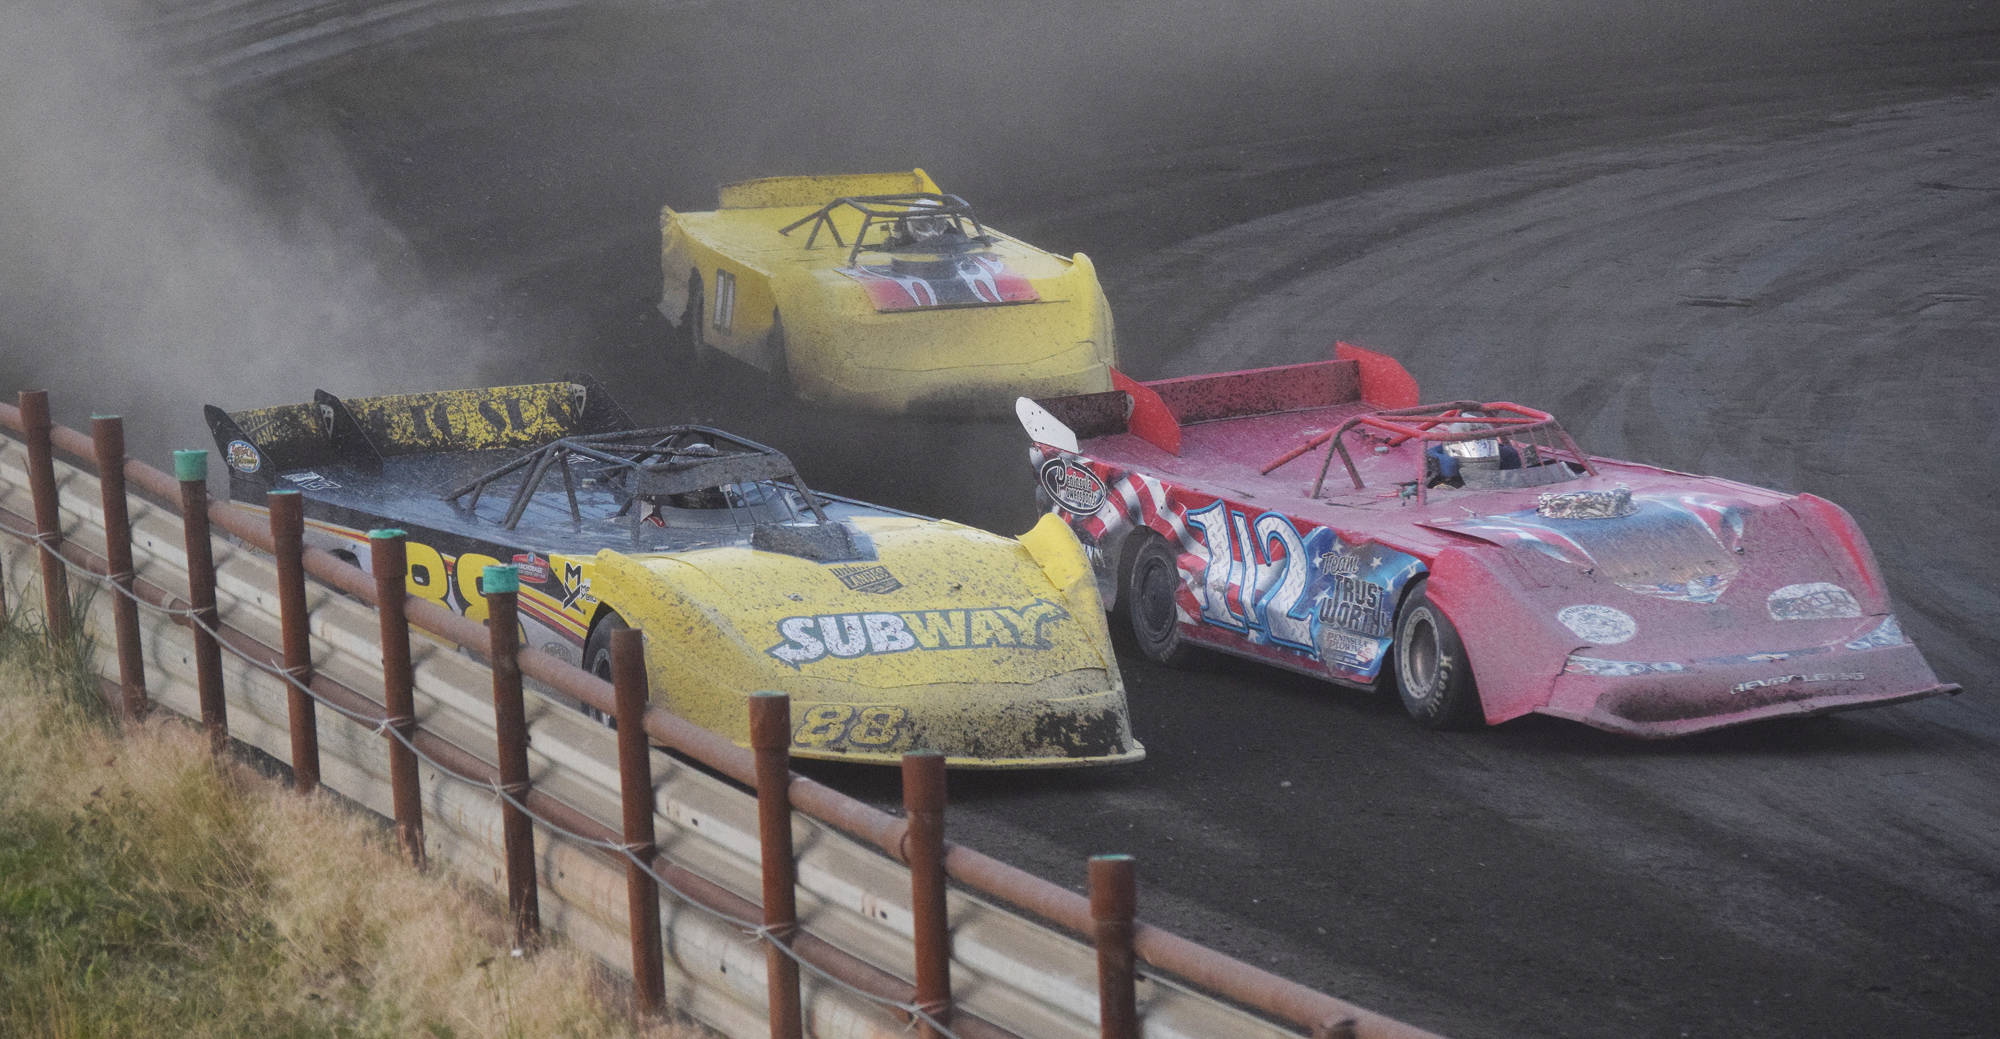 Justin Creech (left) and Sean Endsley (1/2) race closely off turn 2 in the Late Model feature race Friday night at Twin City Raceway in Kenai. (Photo by Joey Klecka/Peninsula Clarion)